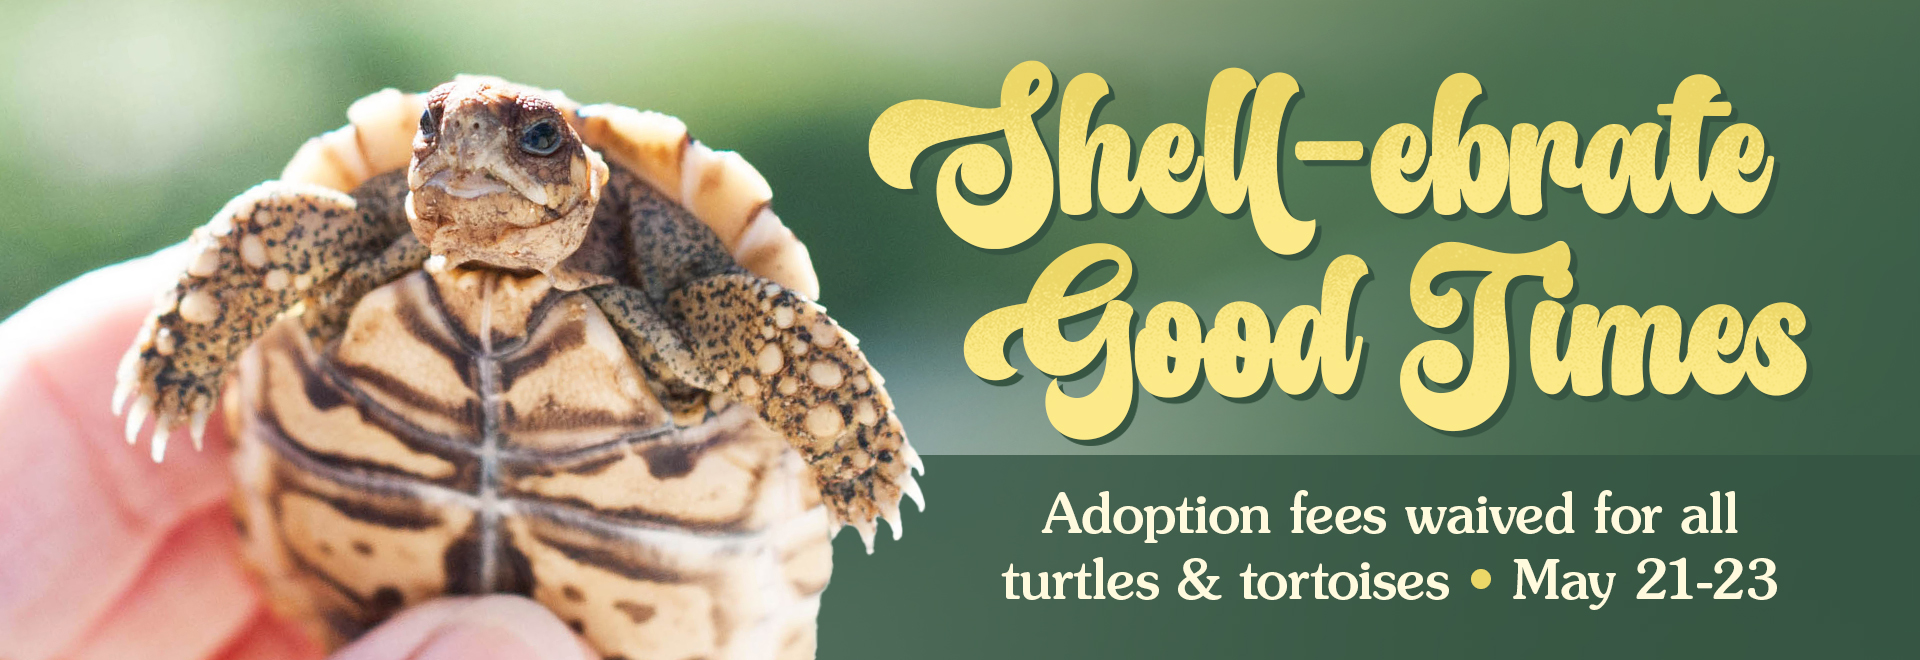 Shell-ebrate Good Times | Adoption fees waived for all turtles & tortoises May 21-23